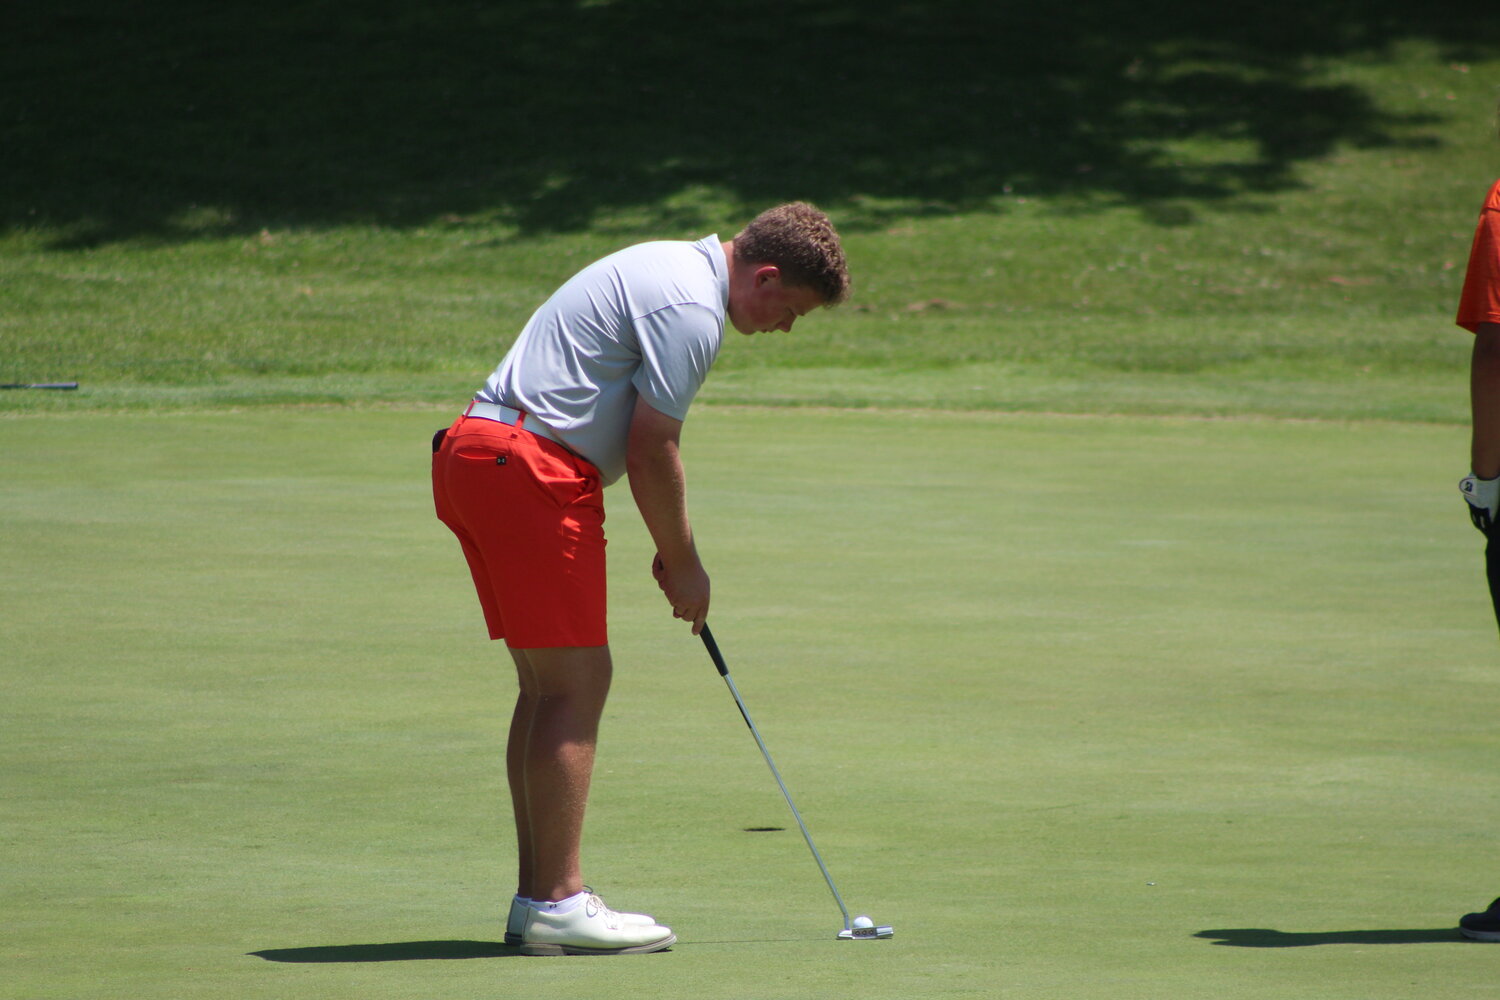 South senior Harrison Haddock ended his day with an impressive 82 for the Mounties.